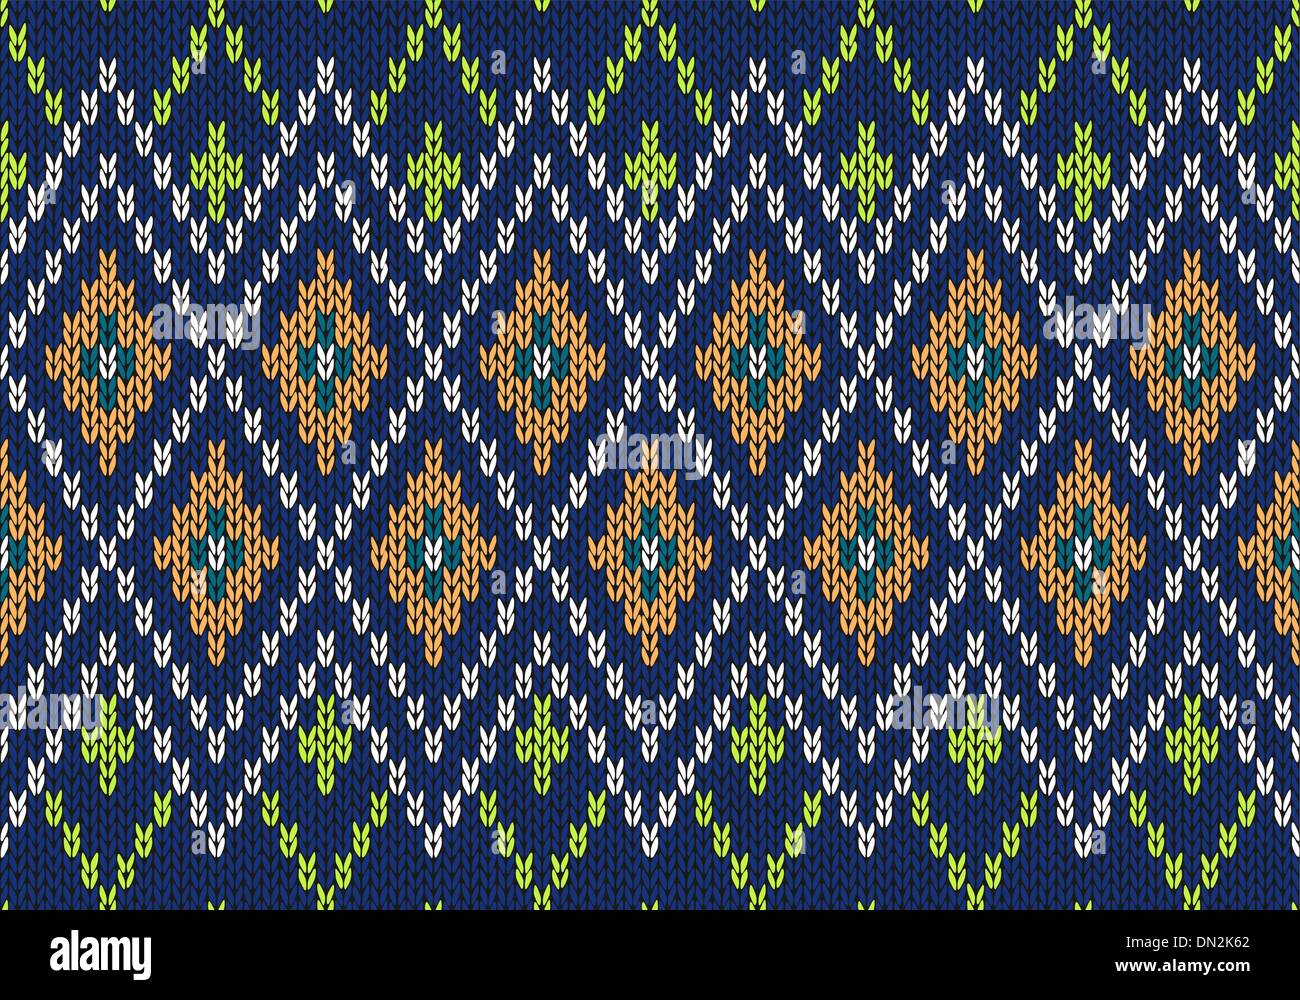 Seamless Ornamental Childish Style Knitted Vector Pattern Stock Vector